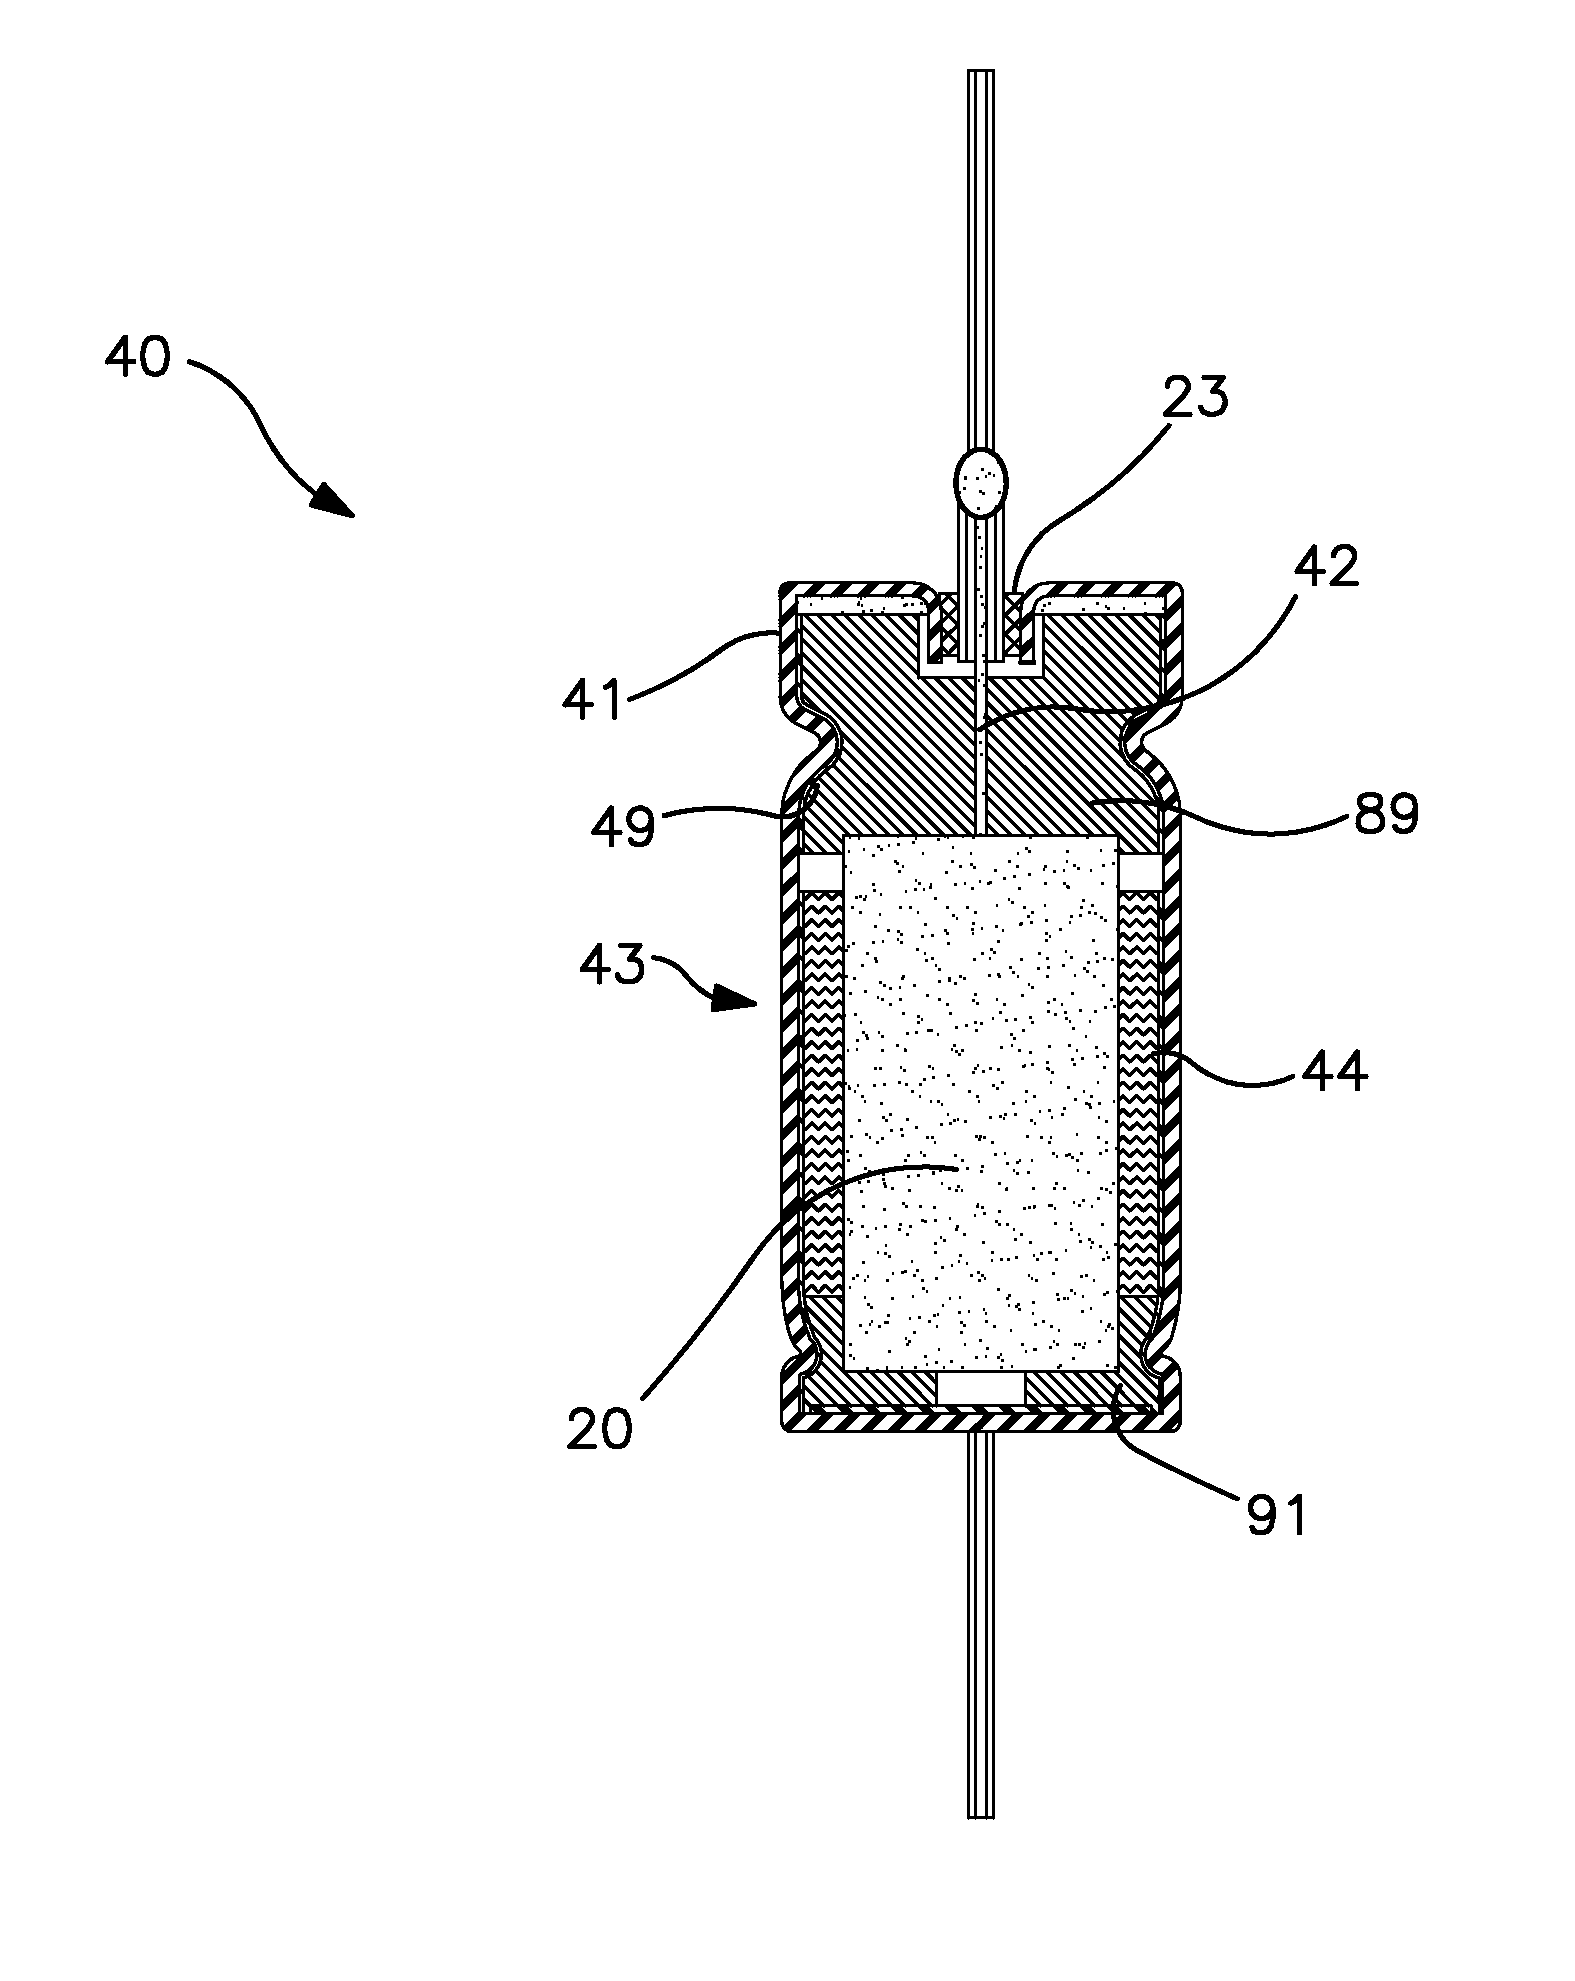 Abrasive blasted conductive polymer cathode for use in a wet electrolytic capacitor